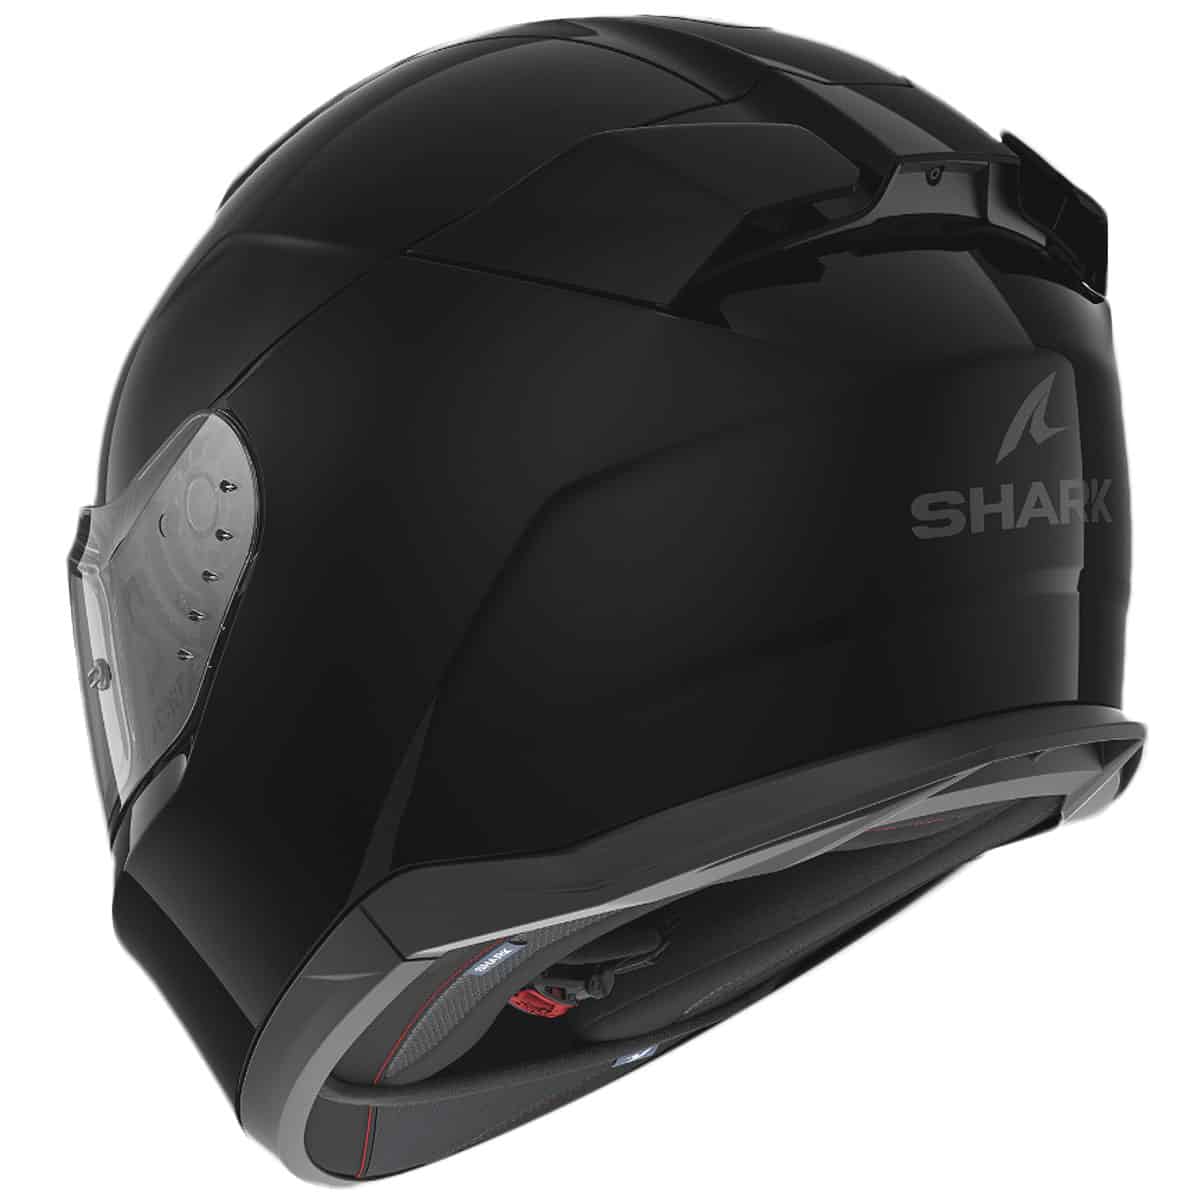 In this price class the Shark D-Skwal 3 offers one of the best interior fits for most head shapes, and the helmet has all the details that make a difference day-to-day - back